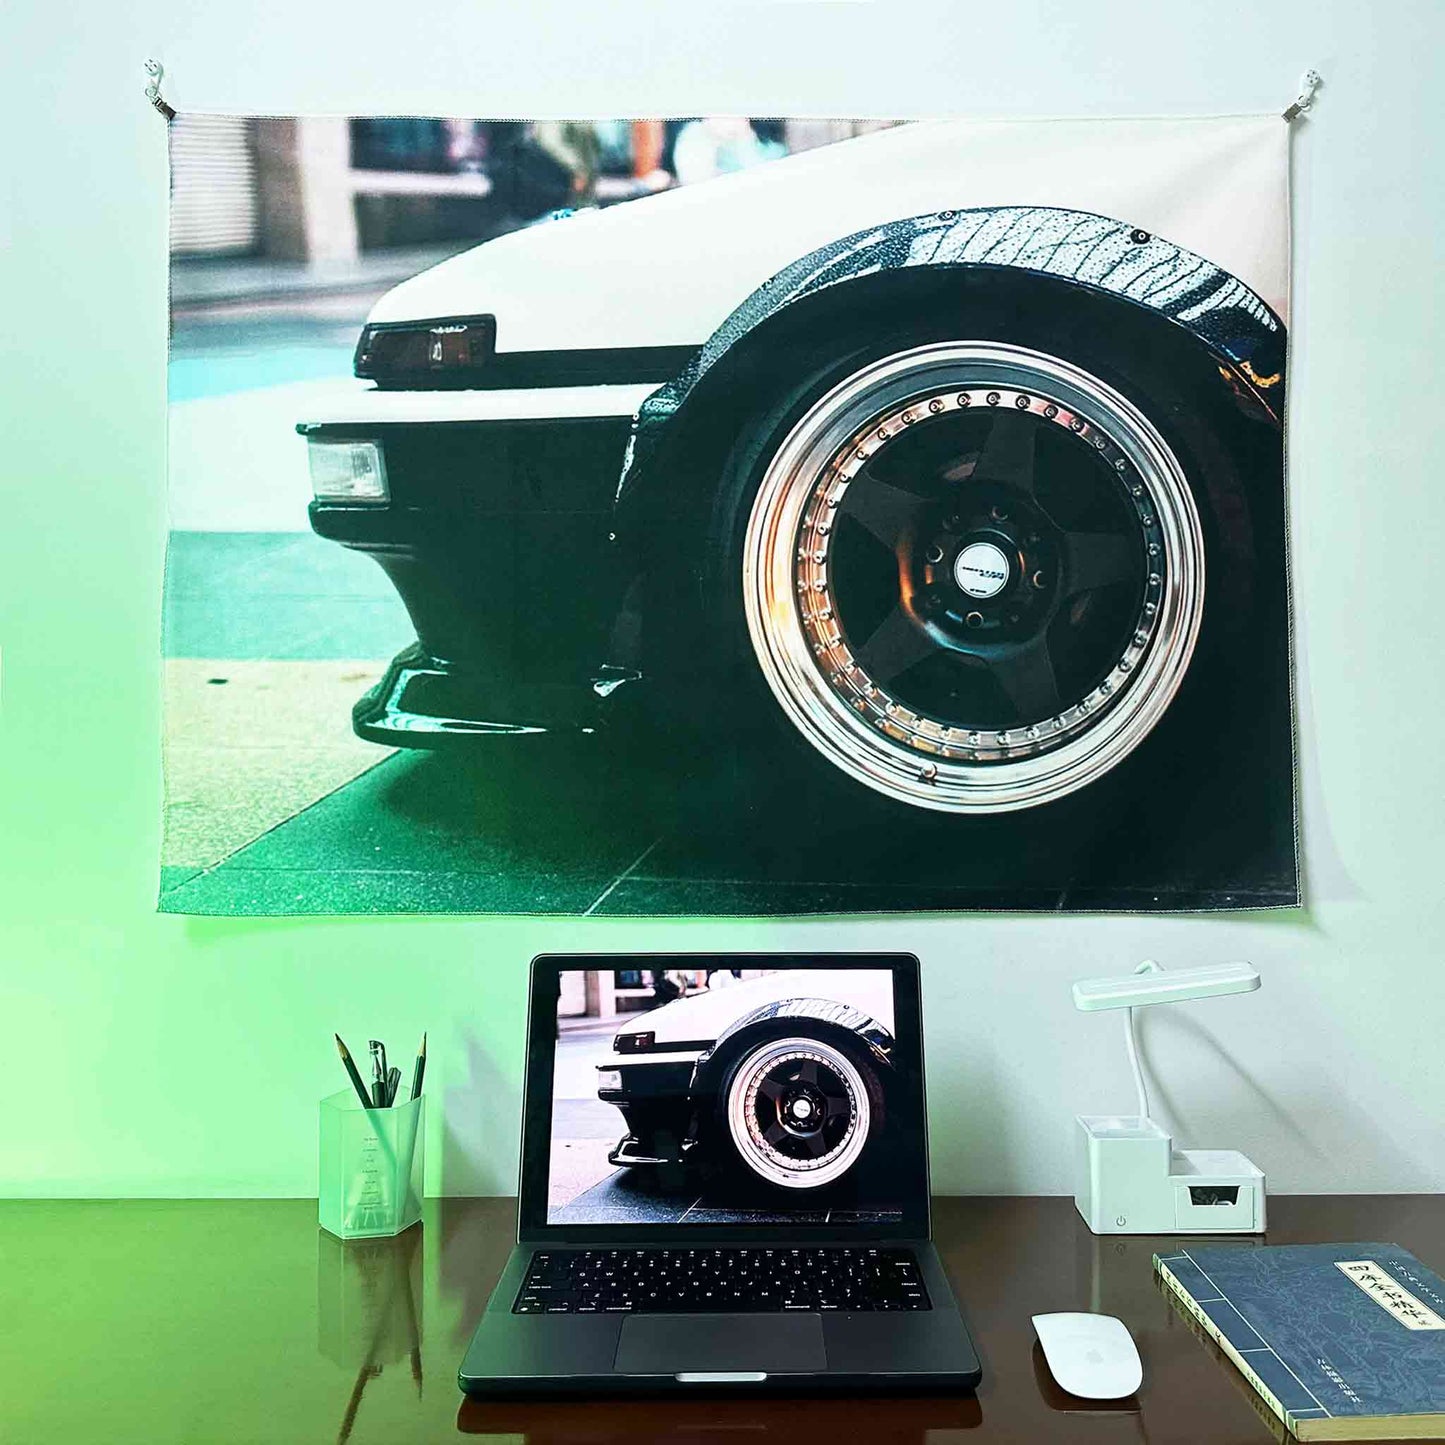 An AE86 artwork hung on a wall, with a laptop showing the same photo as the wall poster underneath, lit by green spotlight